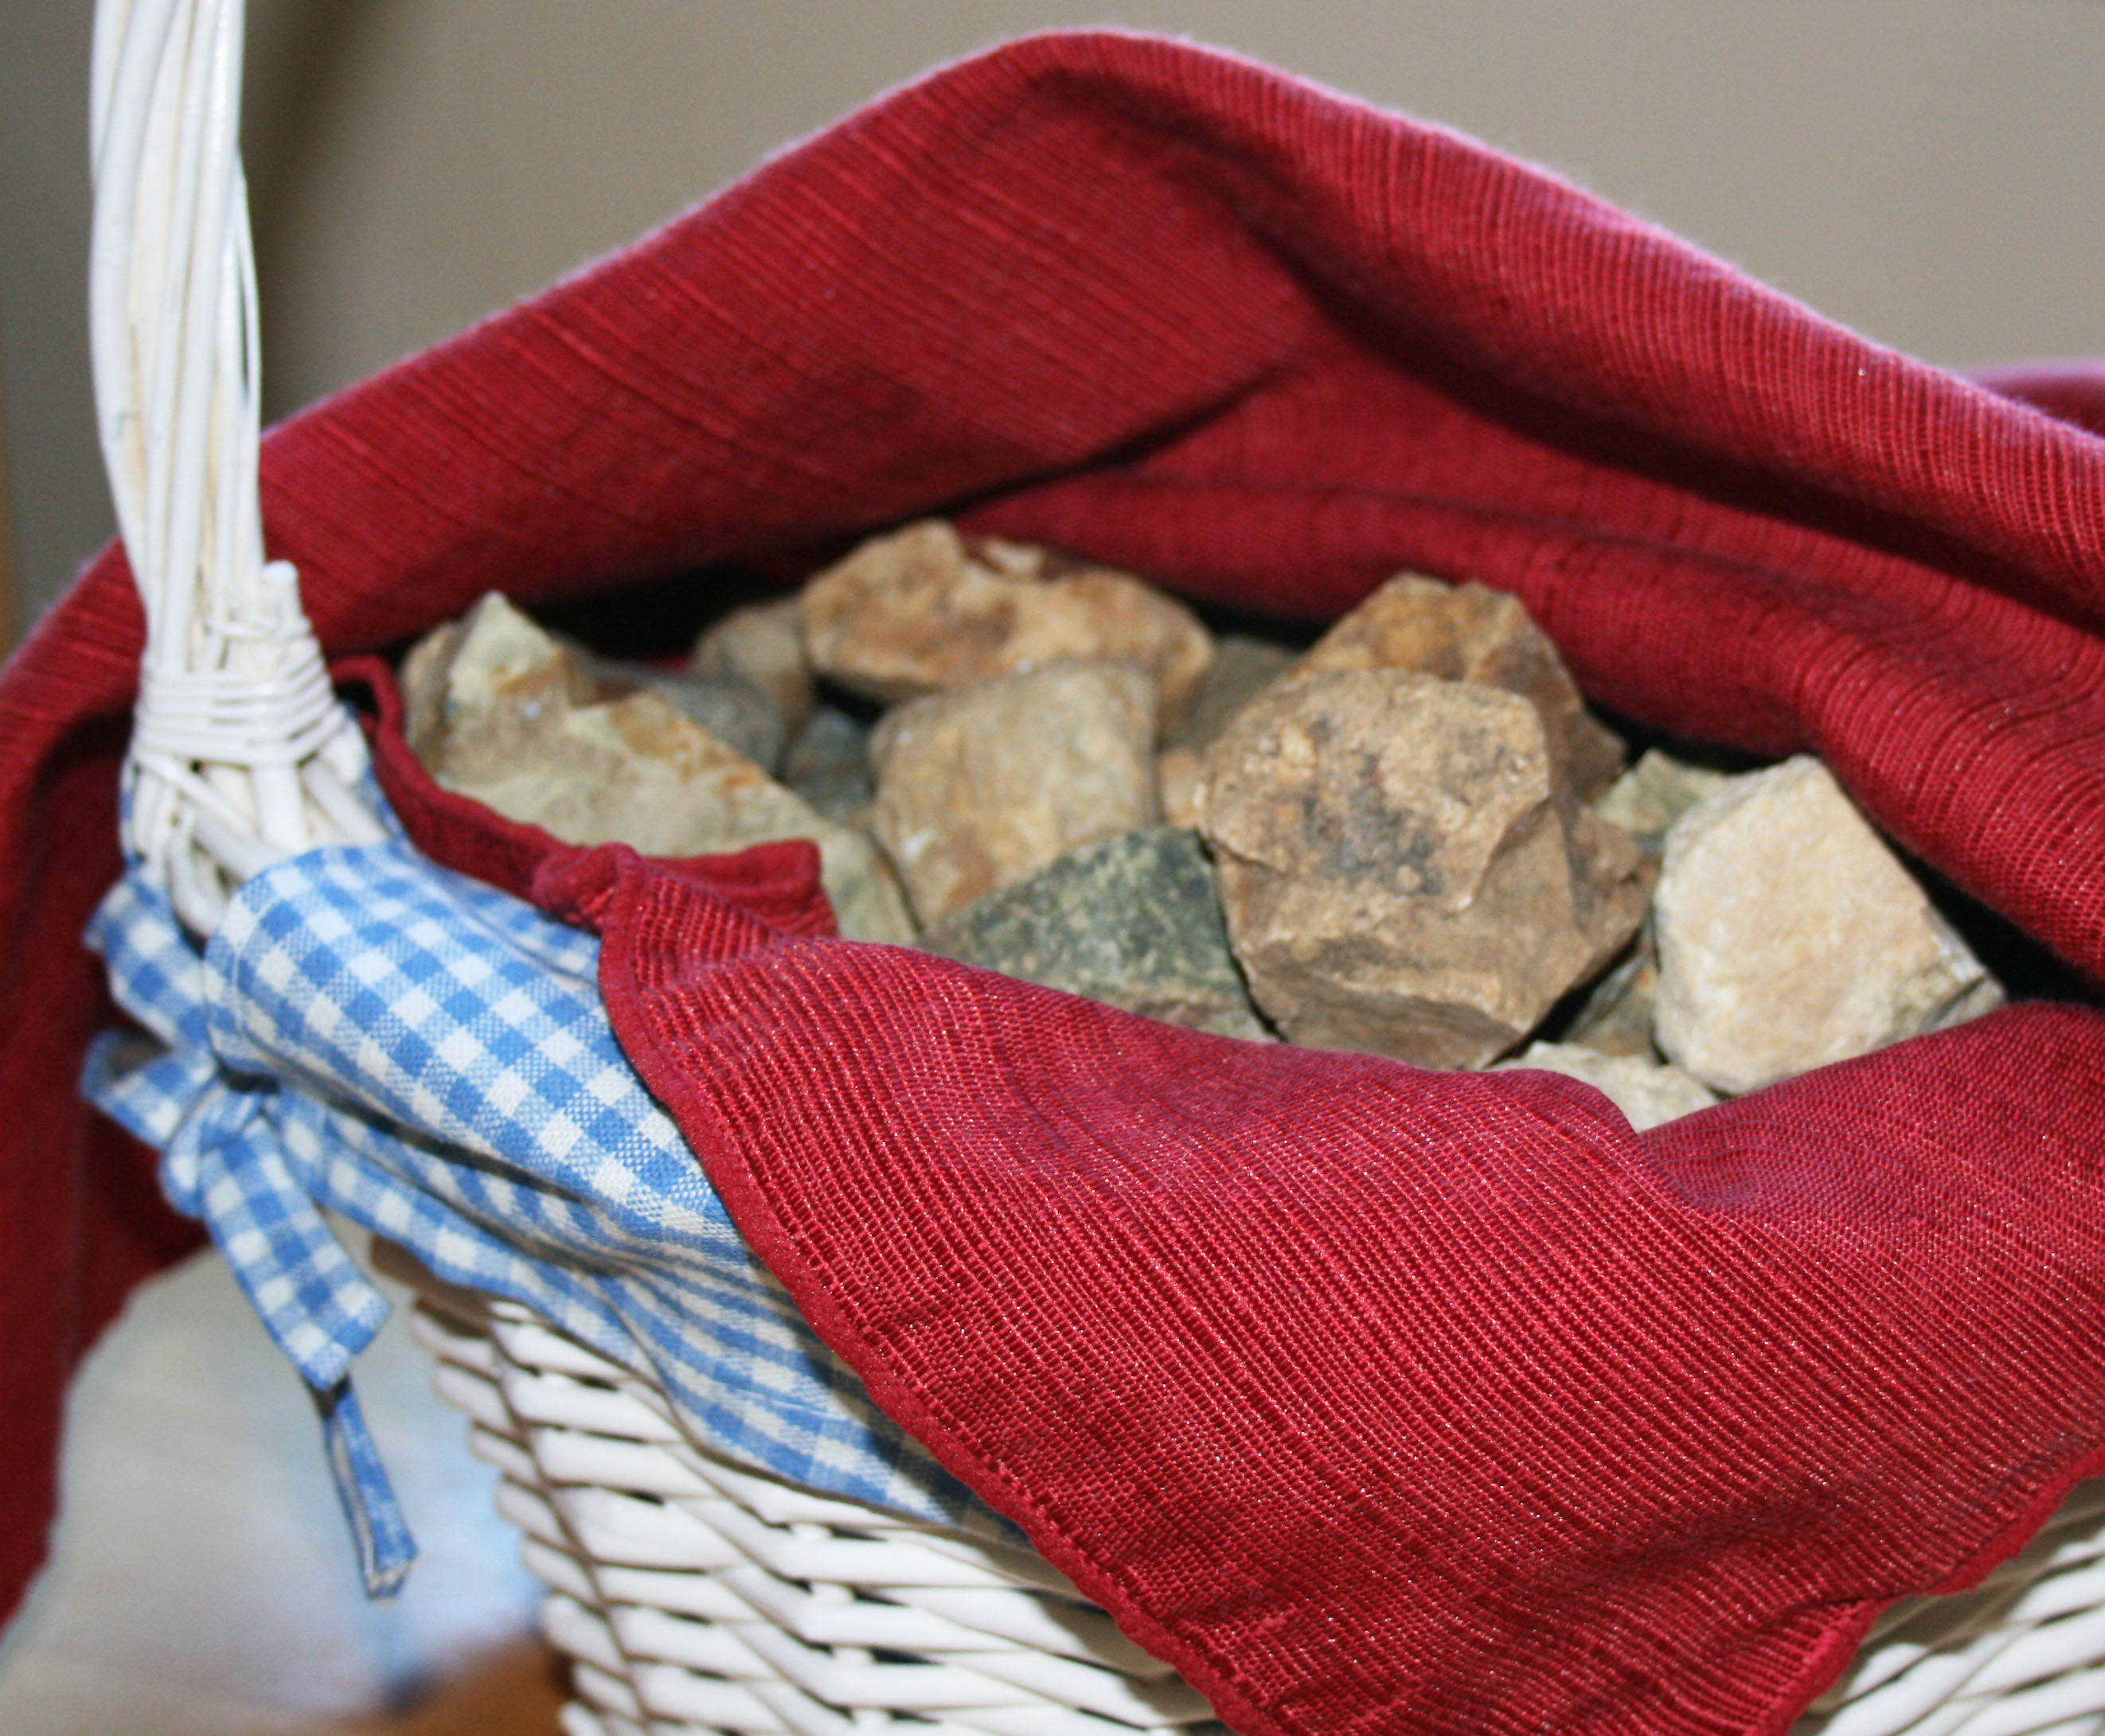 Basket of Rocks for an Easter Tradition